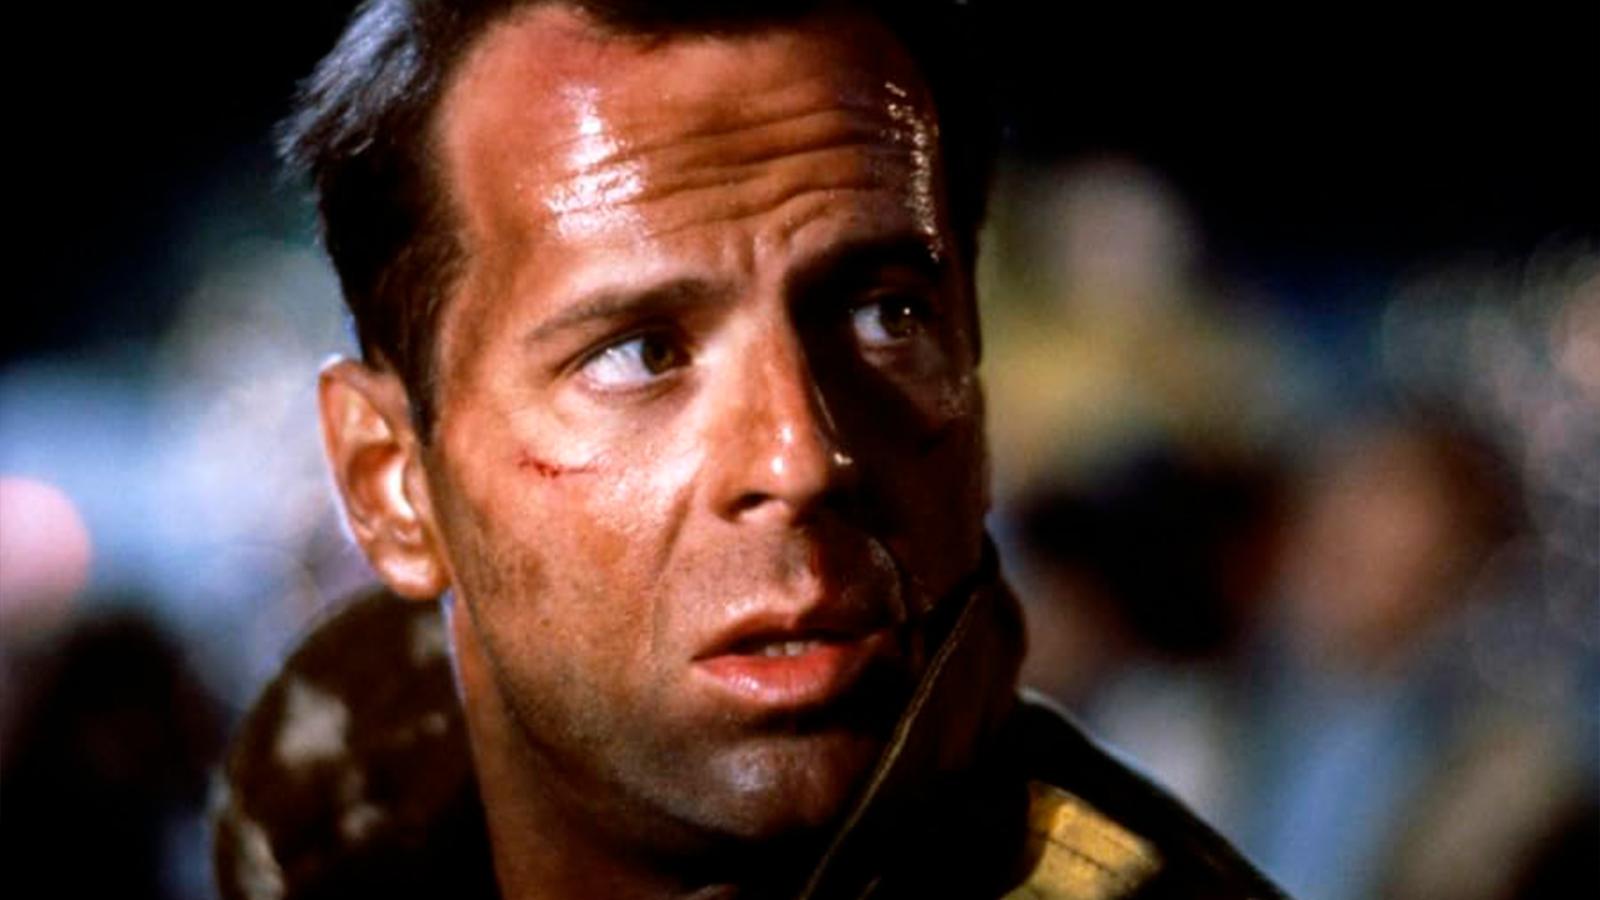 5 Cult Classics That Downright Ruined the Lead Actor’s Life, Ranked - image 3